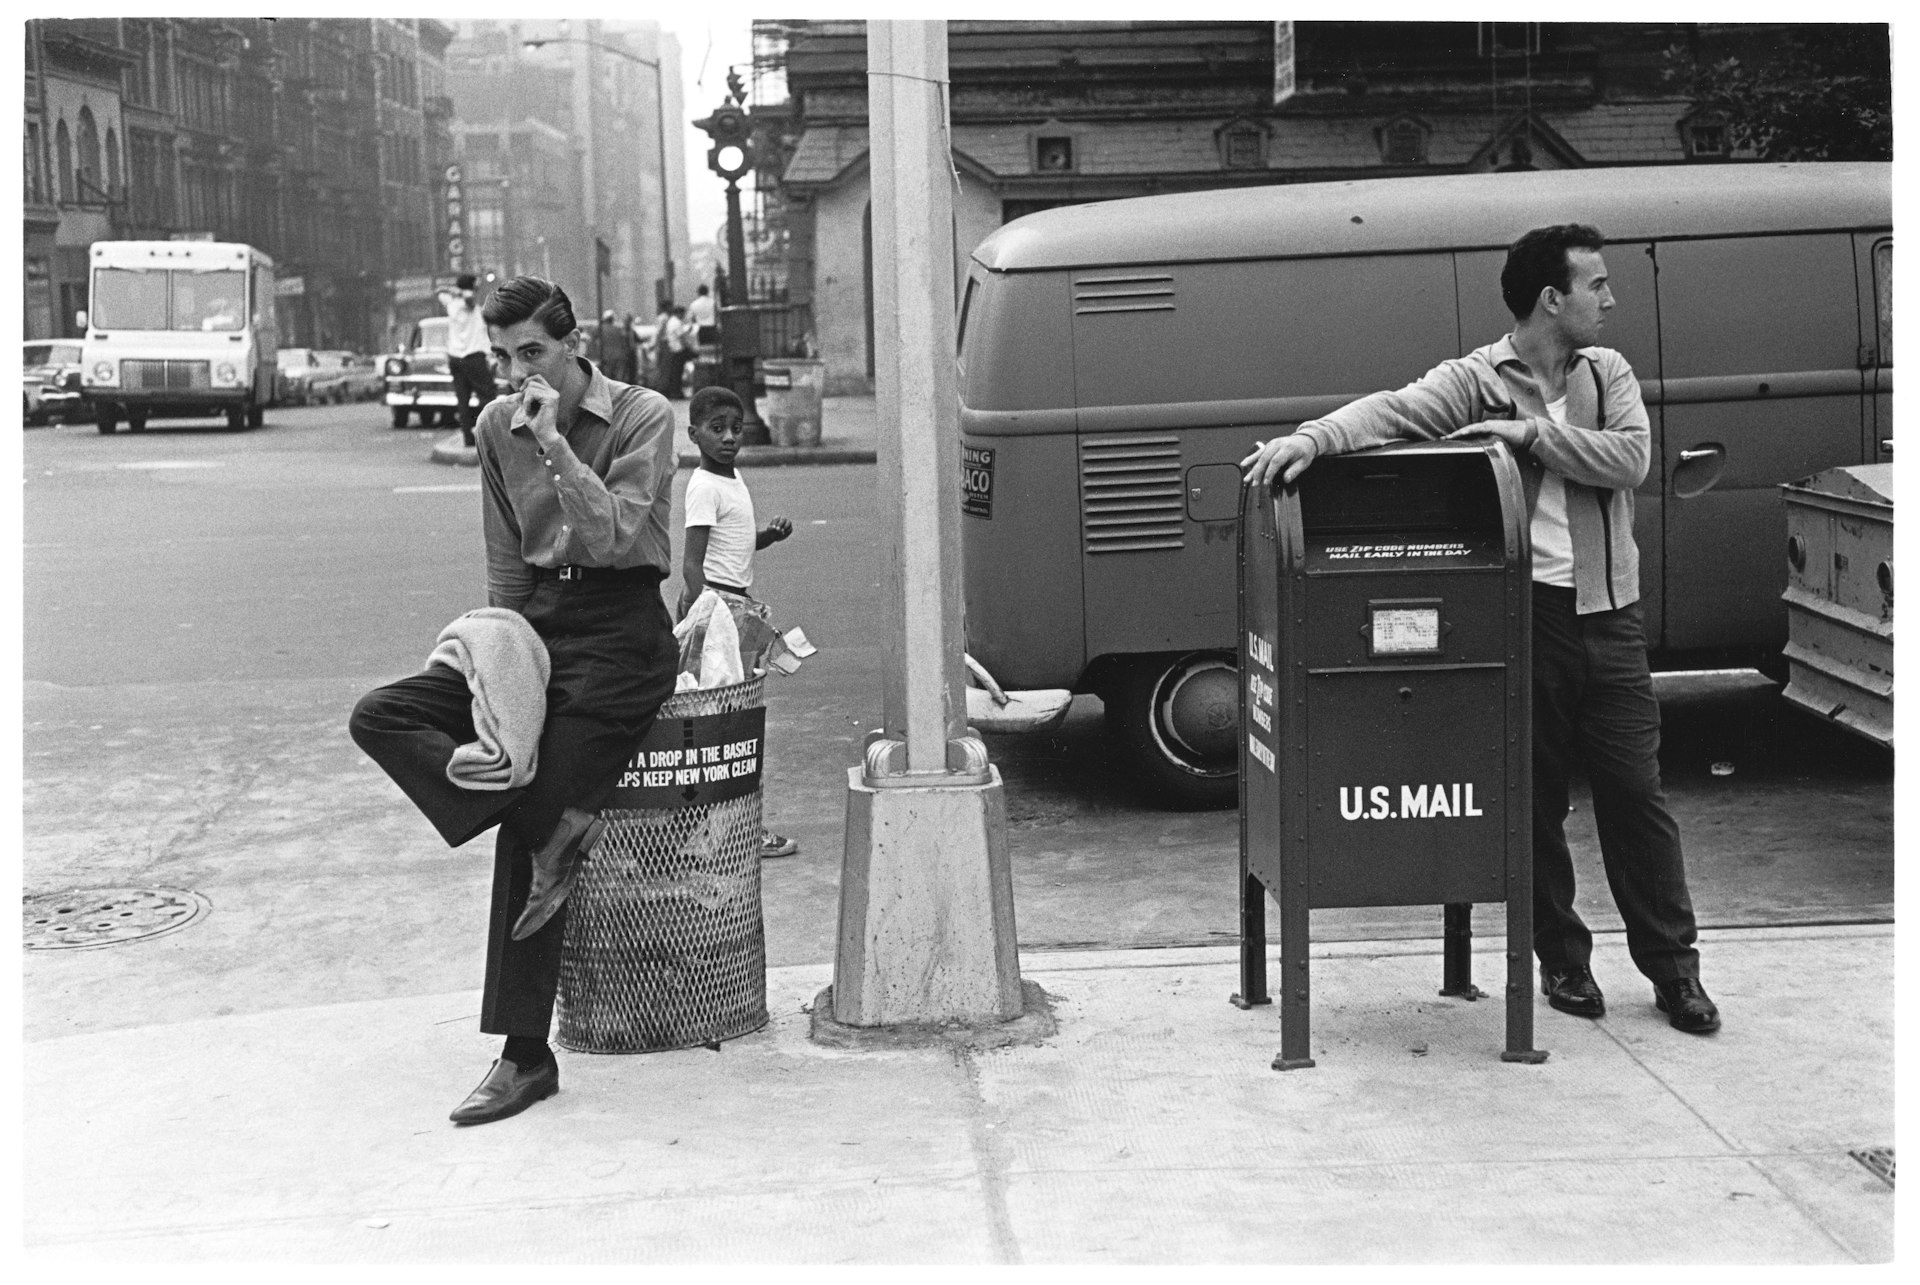 Two young men waiting at the corner, 1965